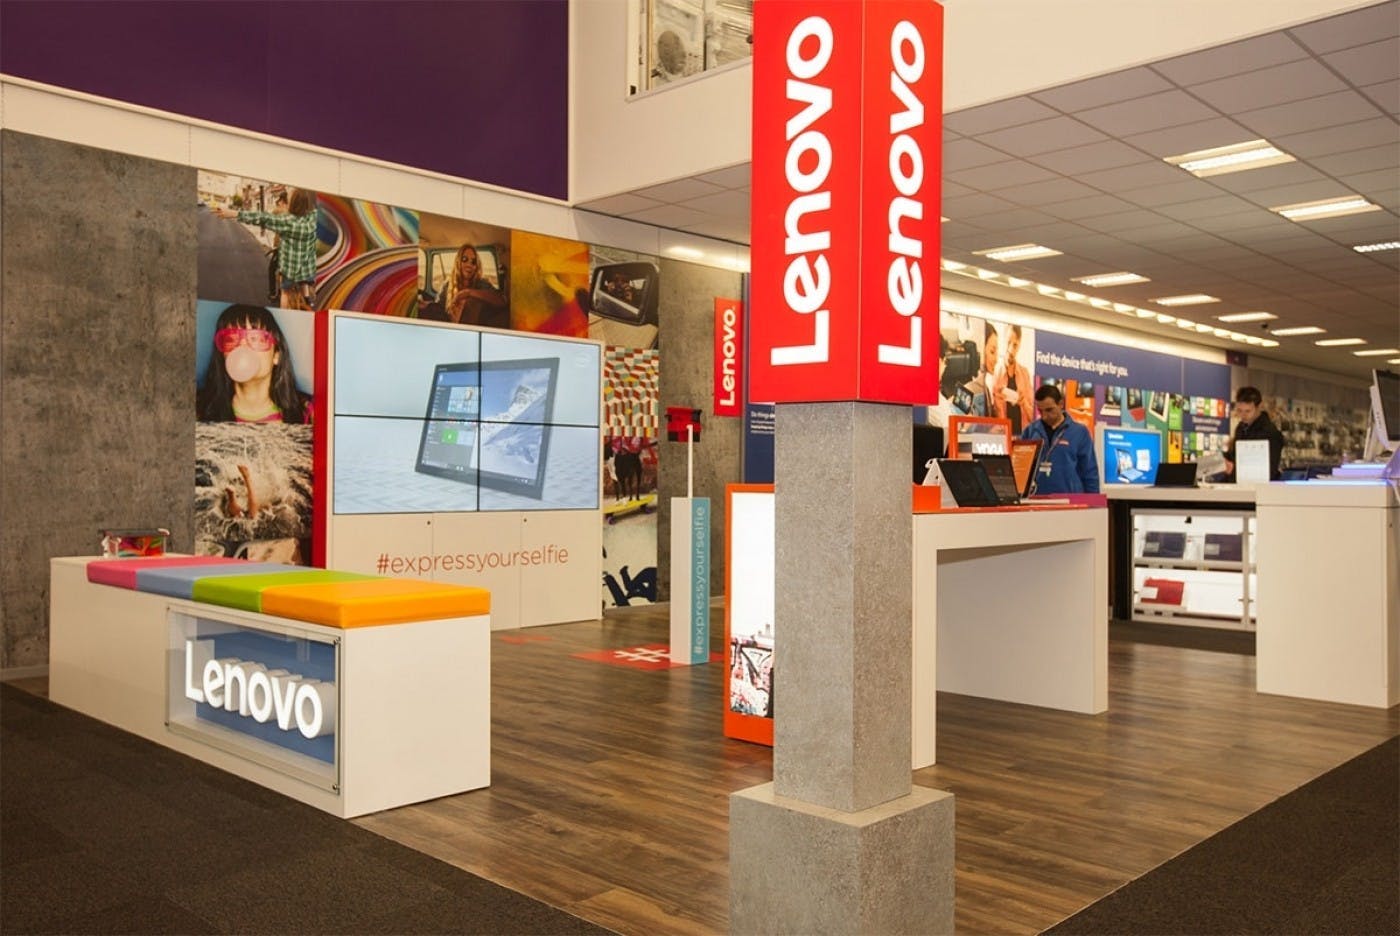 ScreenCloud Article - How Lenovo Got More Customers to Engage with Their Products by Creating a Selfie Wall Powered by ScreenCloud 